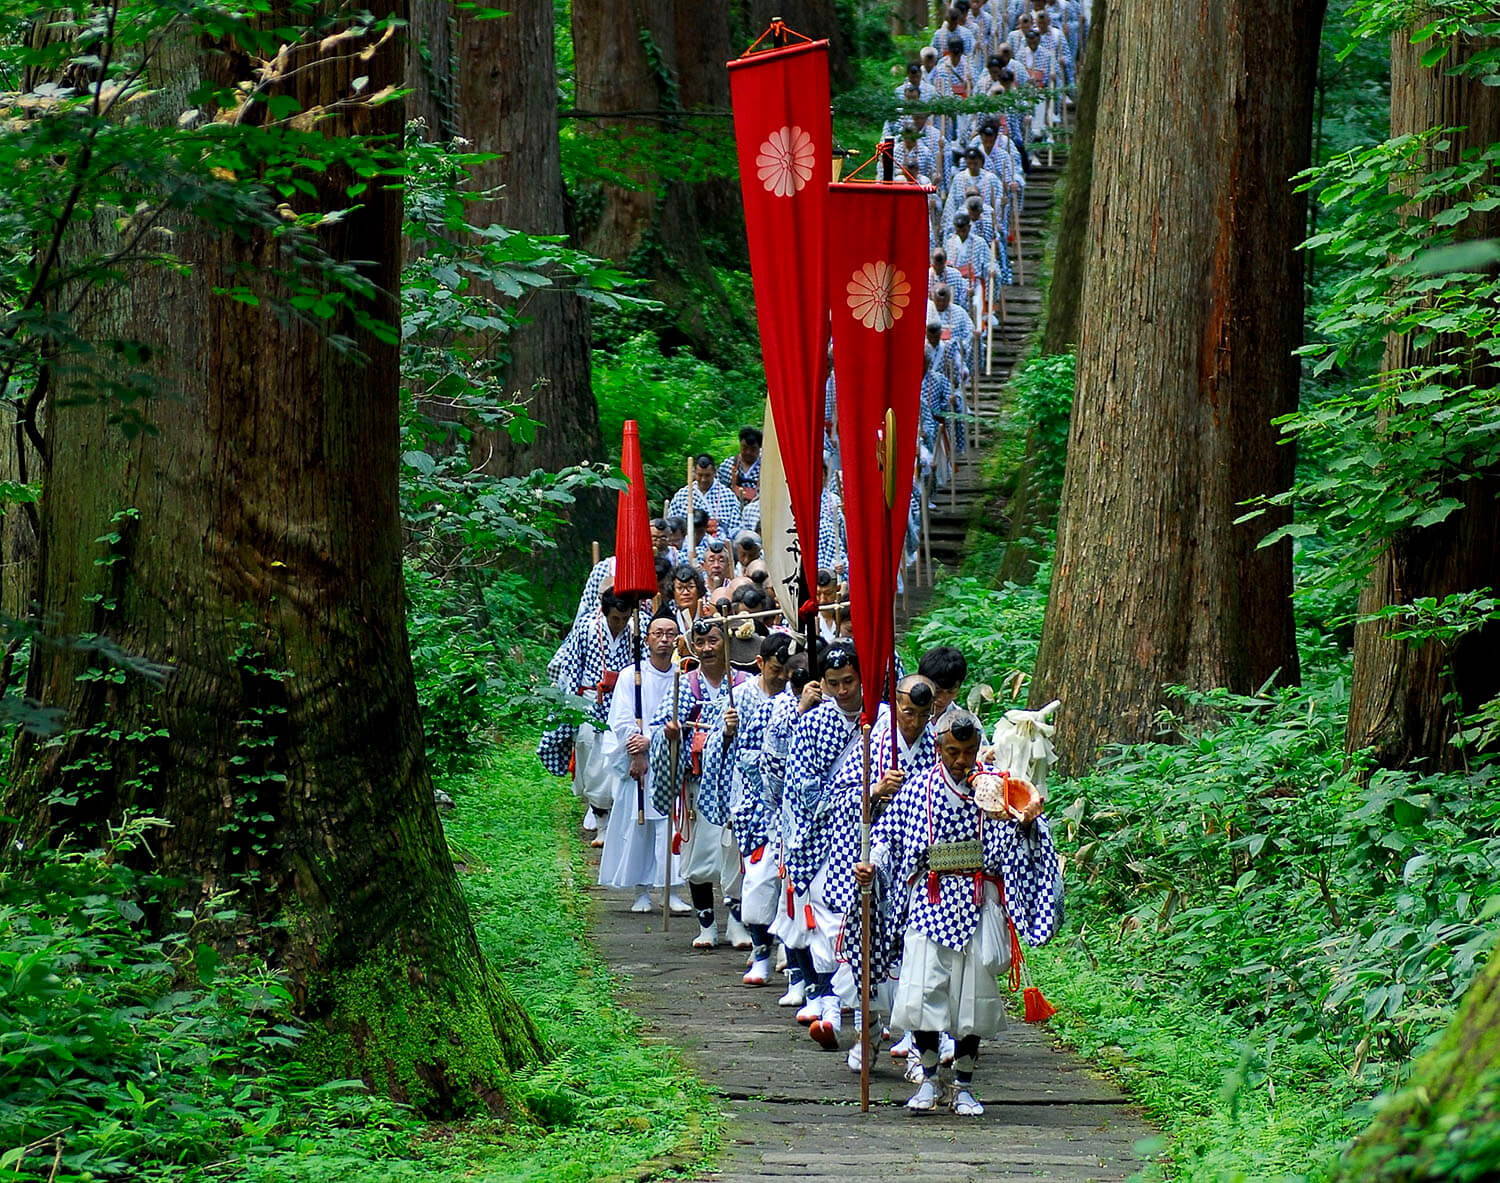 Feeling the eternal history of breathing and the beauty of nature in each season at Yamabushi